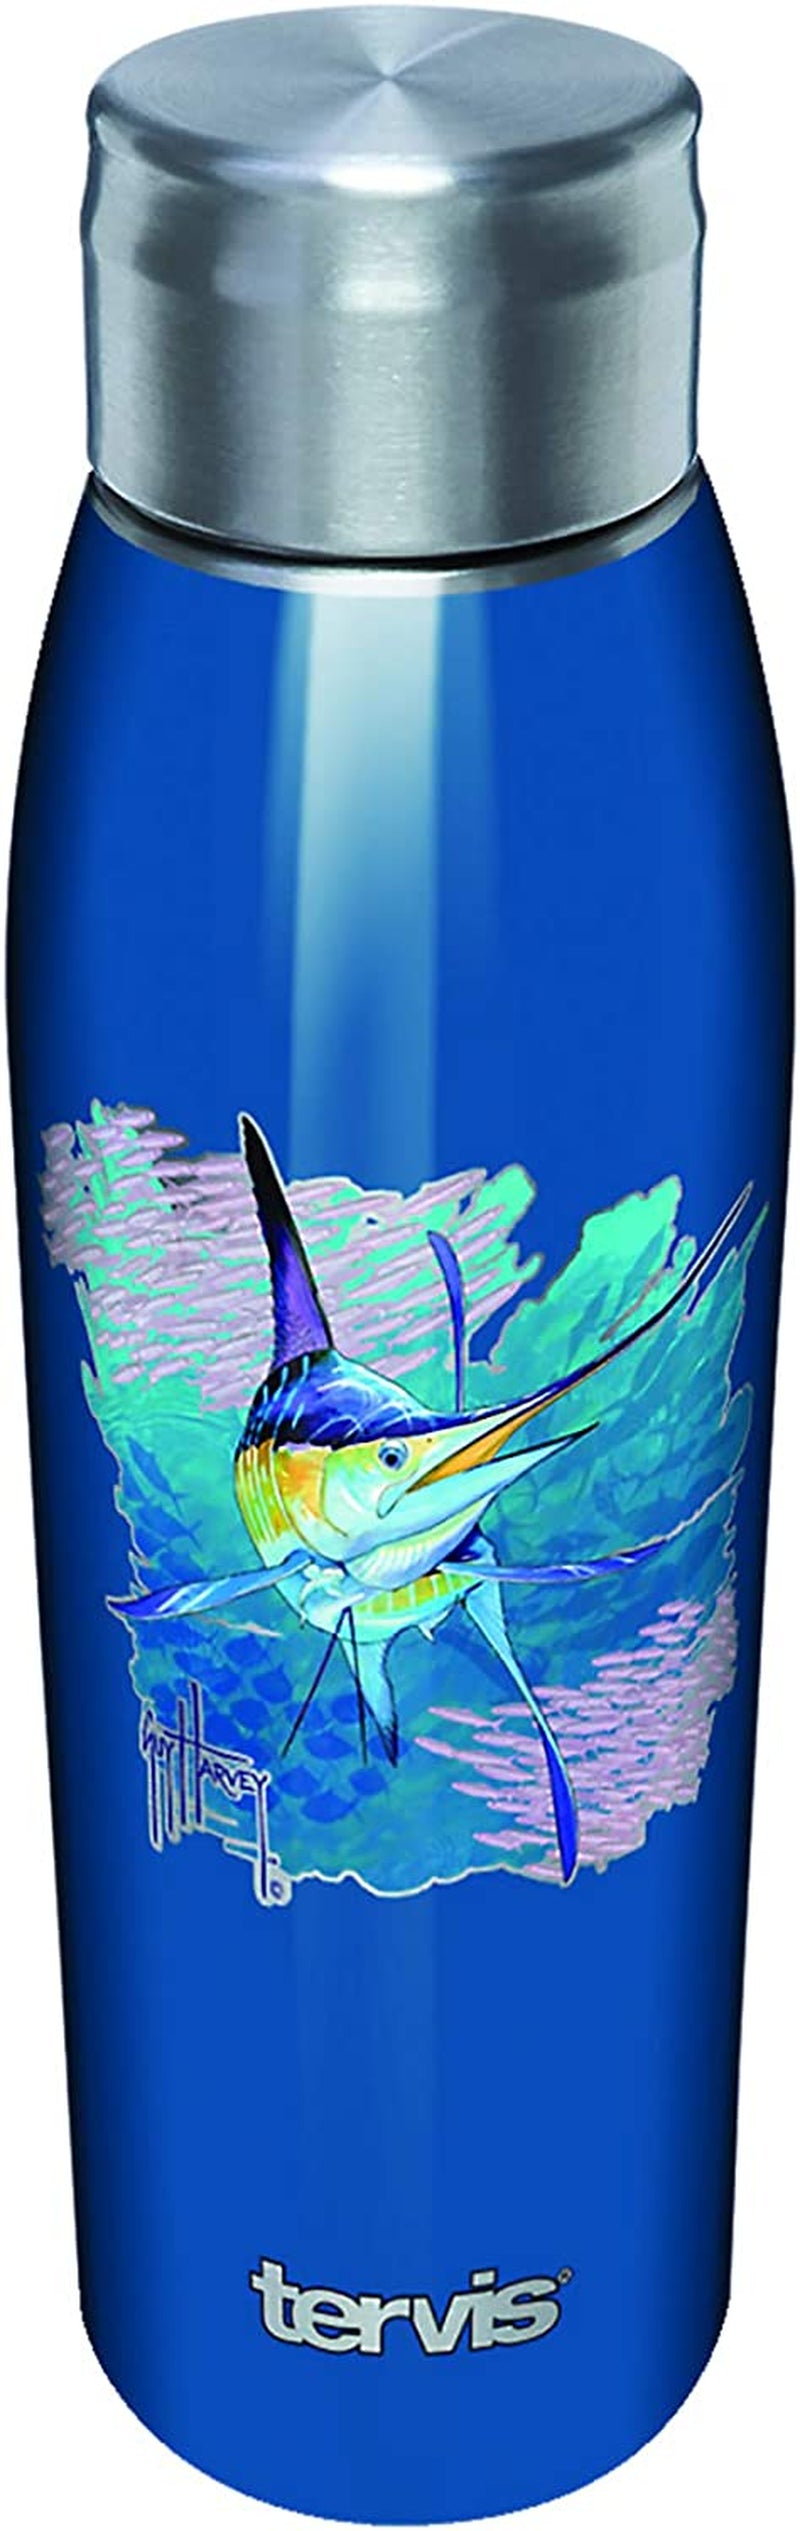 Tervis Made in USA Double Walled Guy Harvey - Offshore Haul Marlin Insulated Tumbler Cup Keeps Drinks Cold & Hot, 16Oz Mug, Classic Home & Garden > Kitchen & Dining > Tableware > Drinkware Tervis Stainless Steel 17oz Water Bottle 